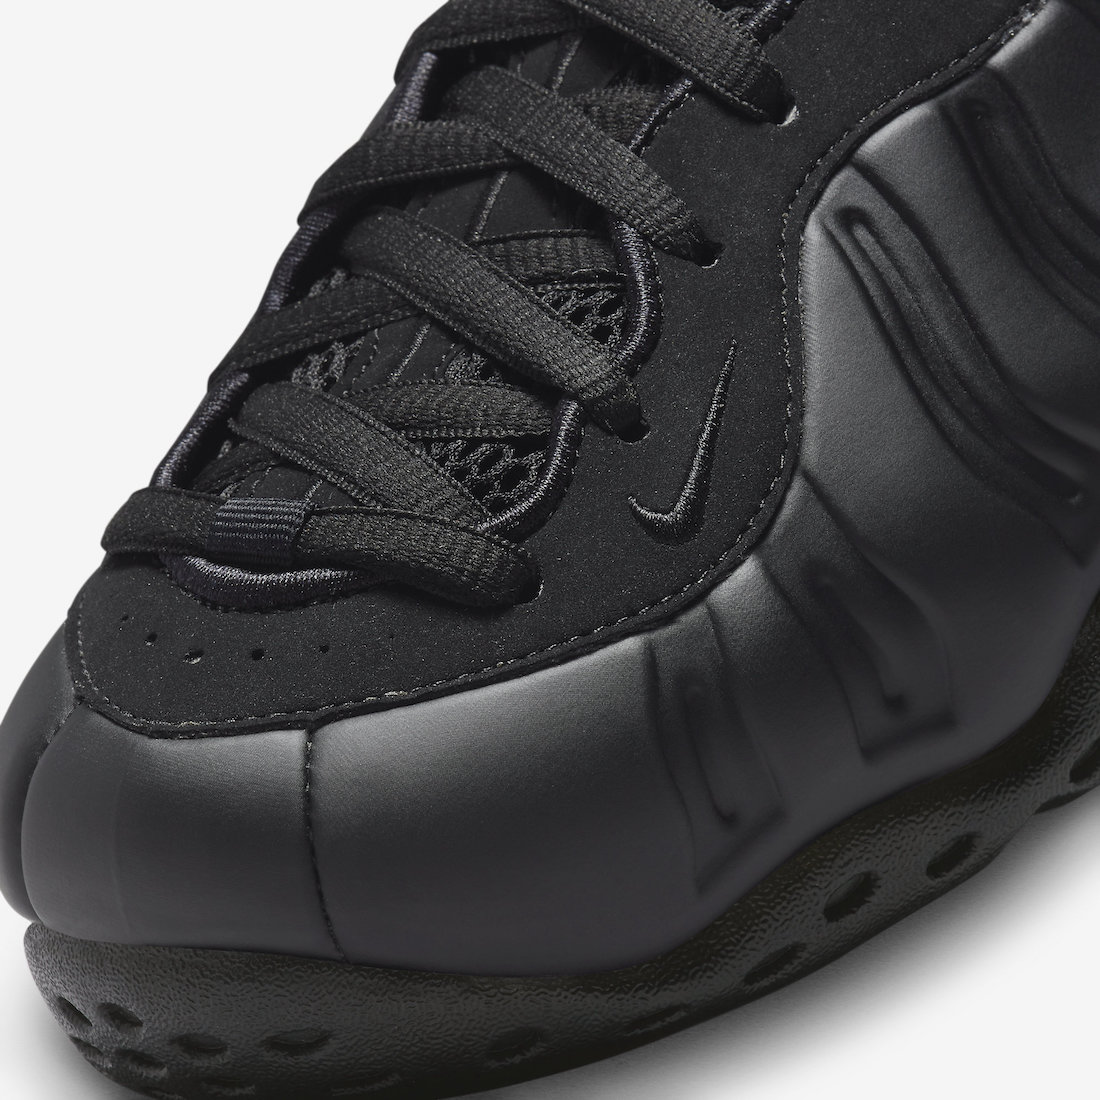 Nike-Air-Foamposite-One-Anthracite-2023-FD5855-001-Release-Date-6.jpg